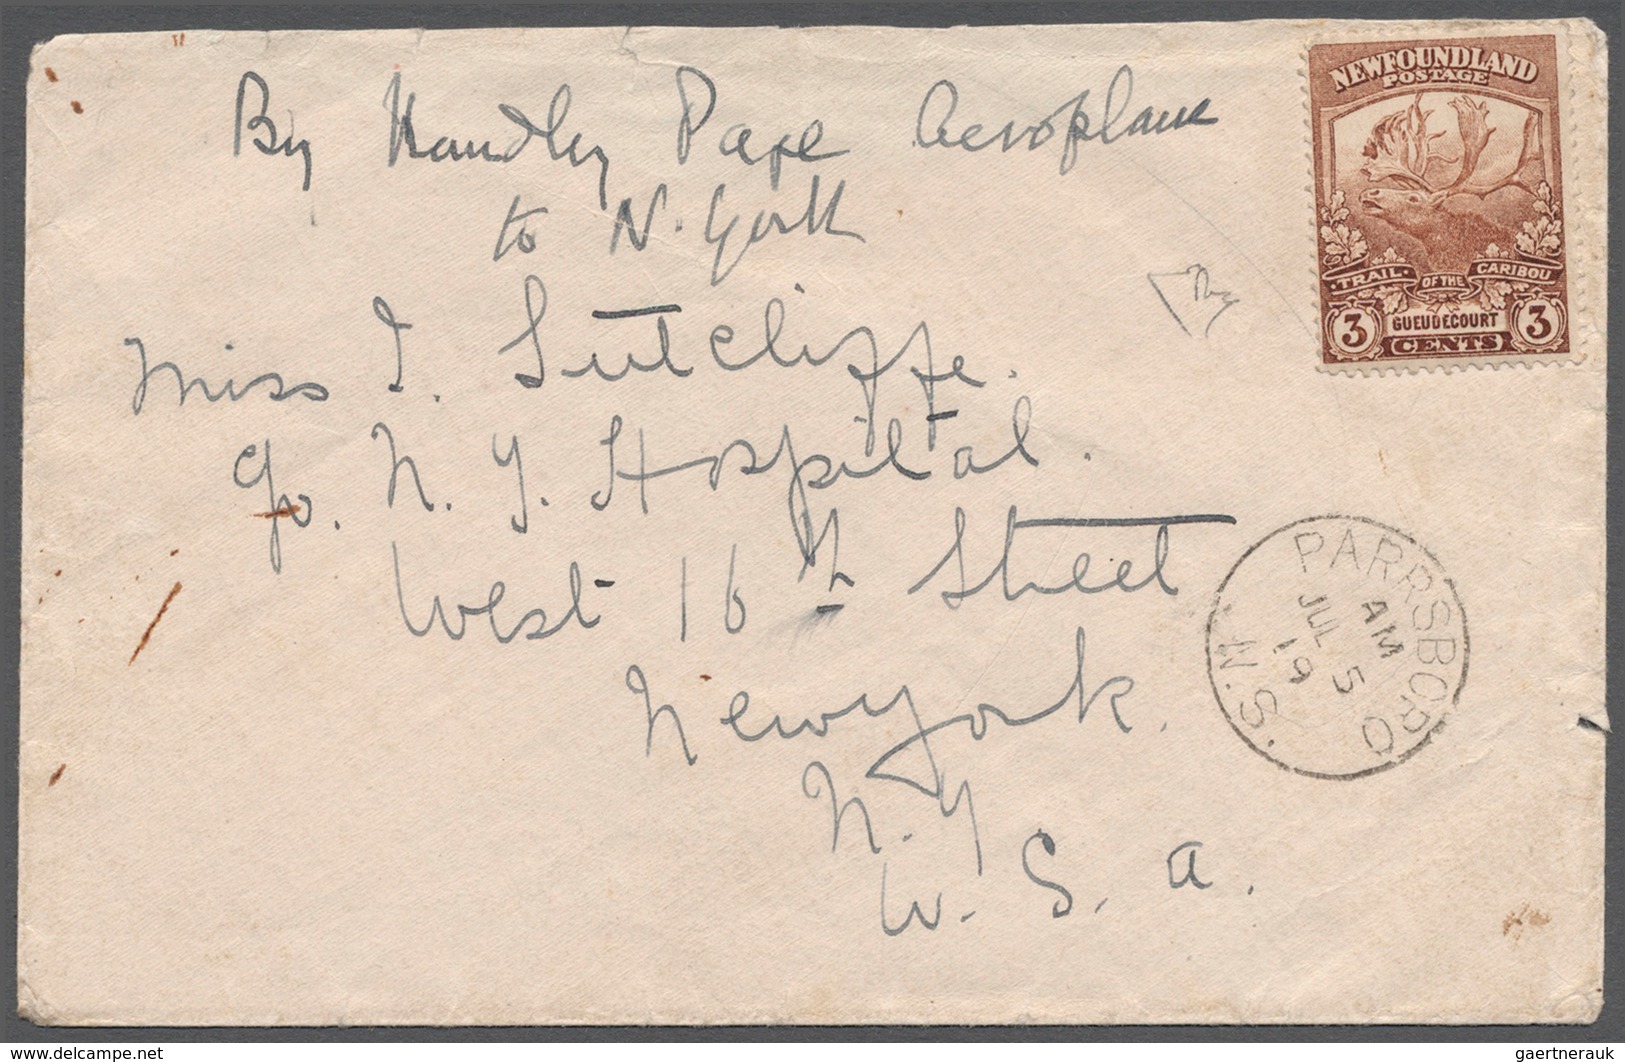 Neufundland: SUPPLEMENTARY MAIL „HANDLEY PAGE”: 1919, Unoverprinted Caribou 3 C. Brown Without Cance - 1857-1861